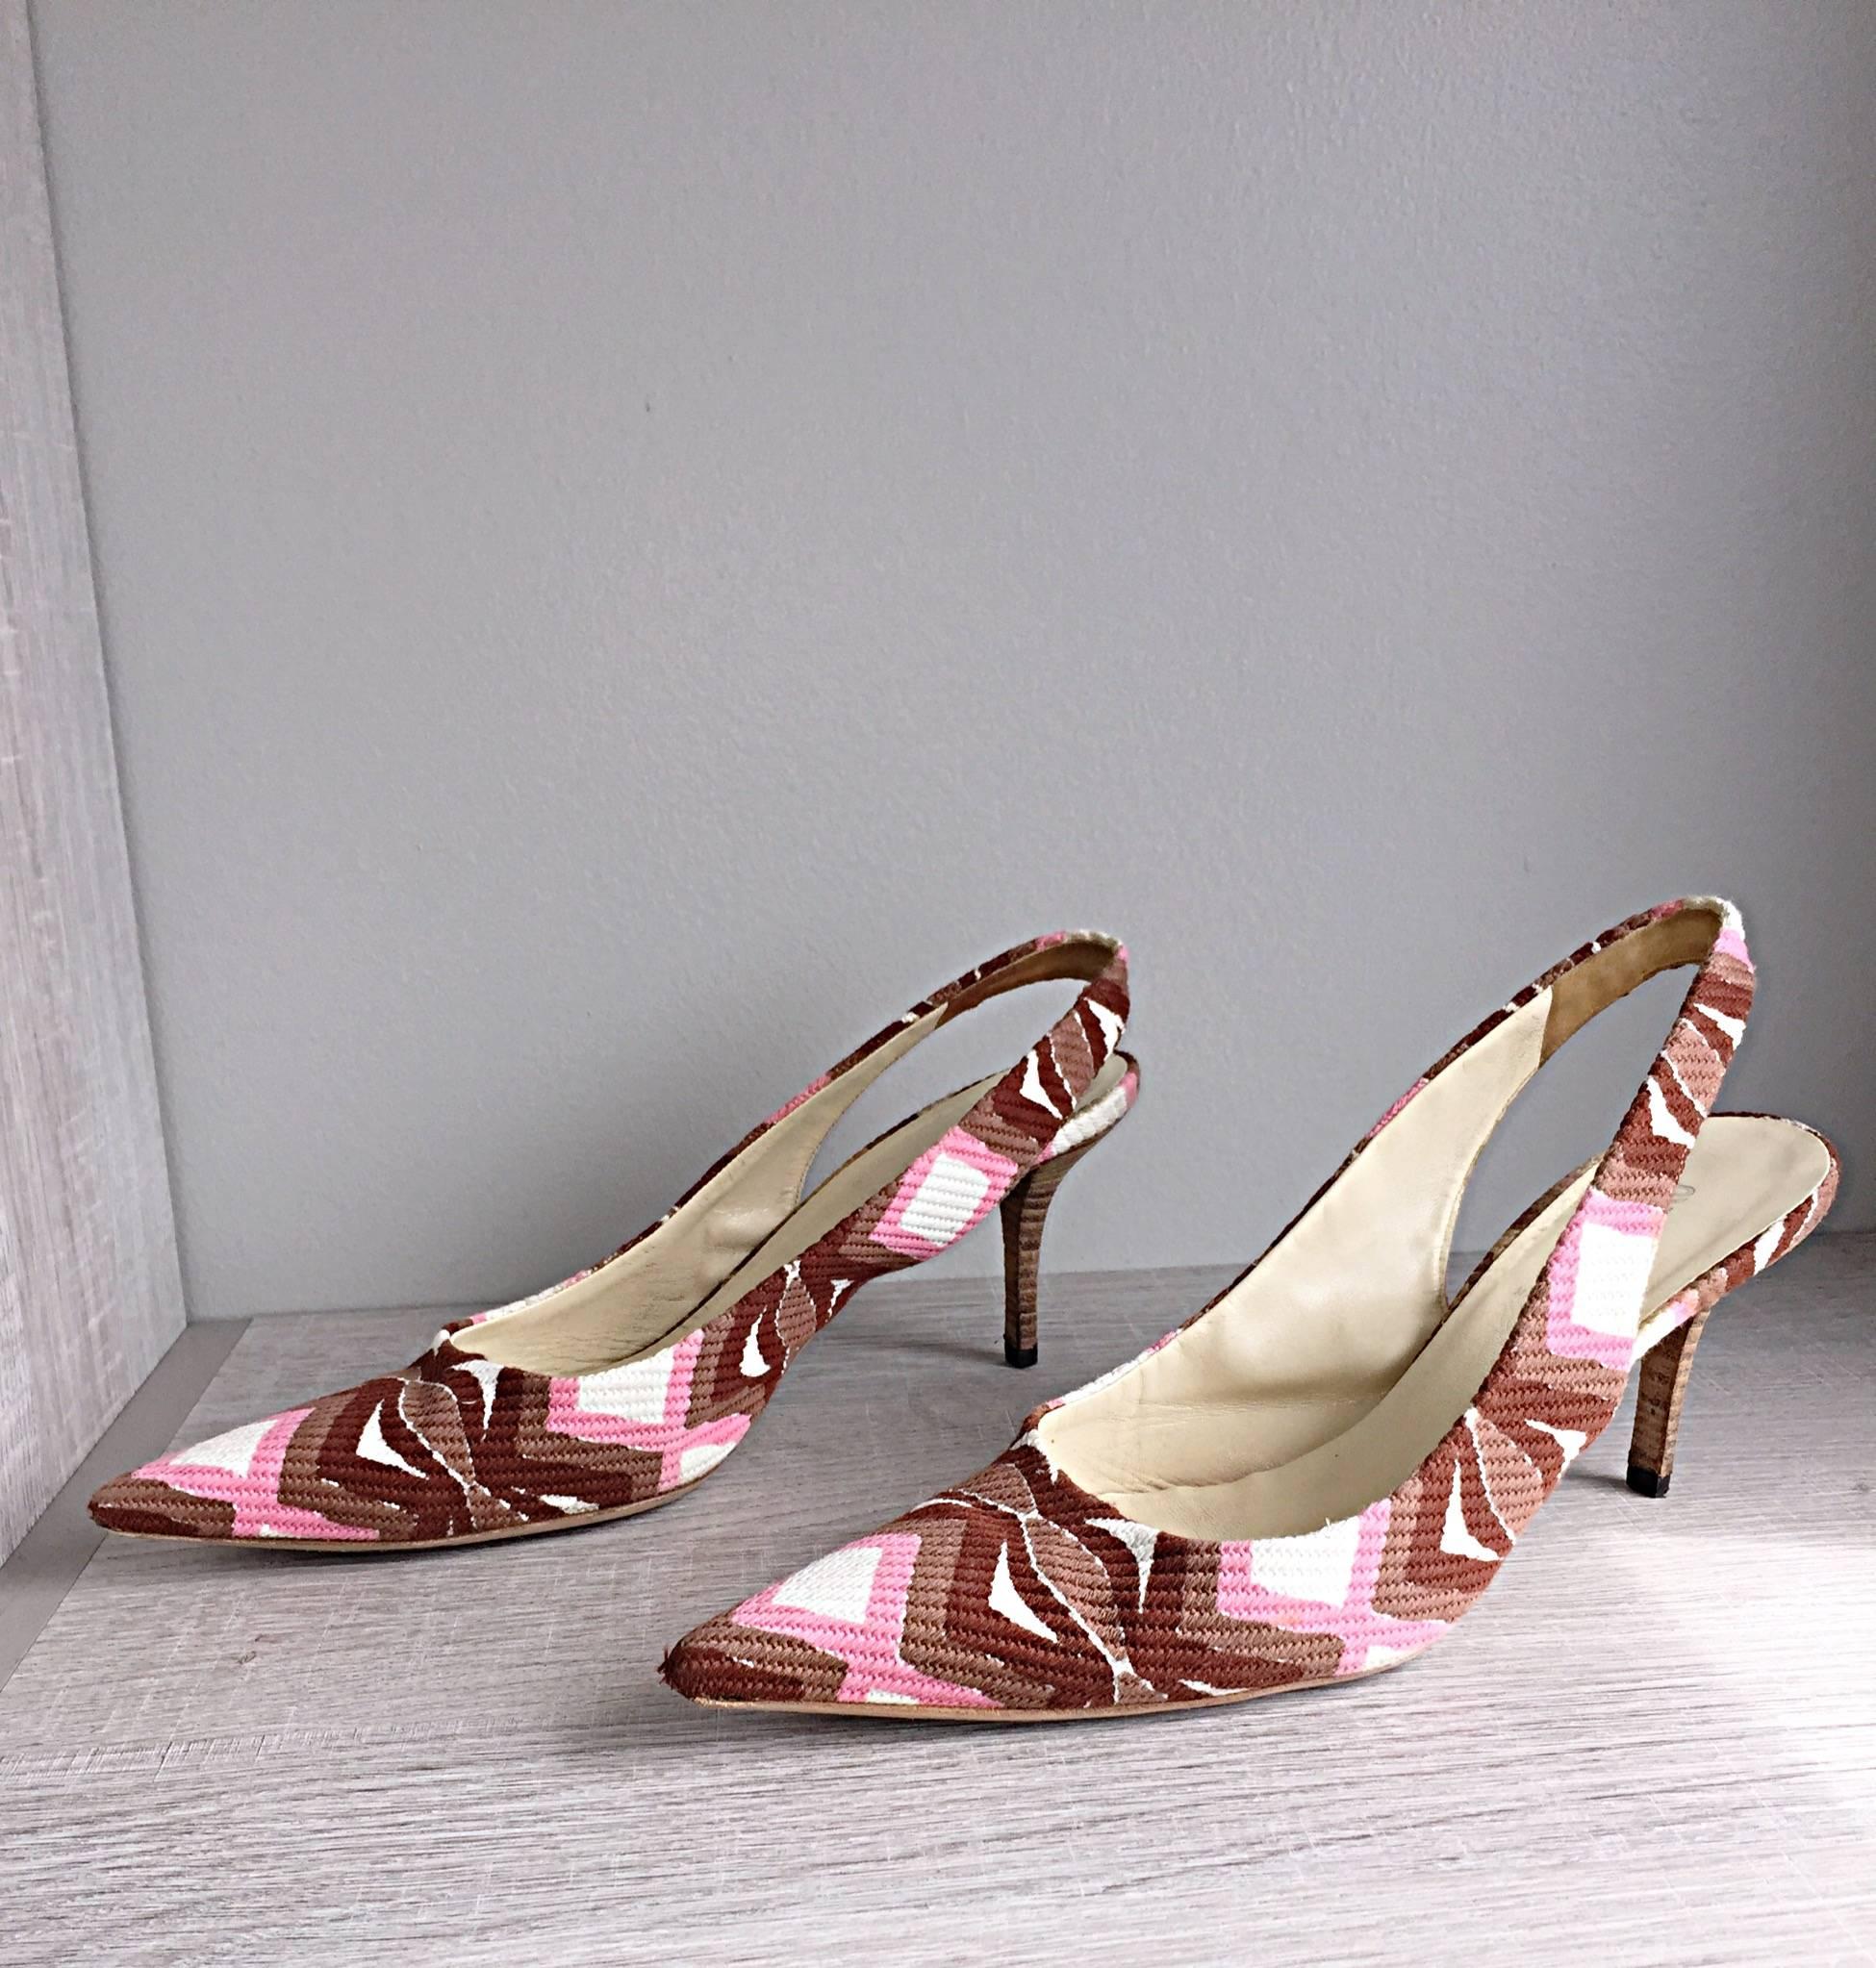 Beautiful pair of MIU MIU slingback heels! Worn once, and in perfect condition. Zig zag patterns in pink, taupe, brown and white. Light wooden heel. Can easily be dressed up or down. Great with jeans, shorts, a skirt or dress. Made in Italy. Marked